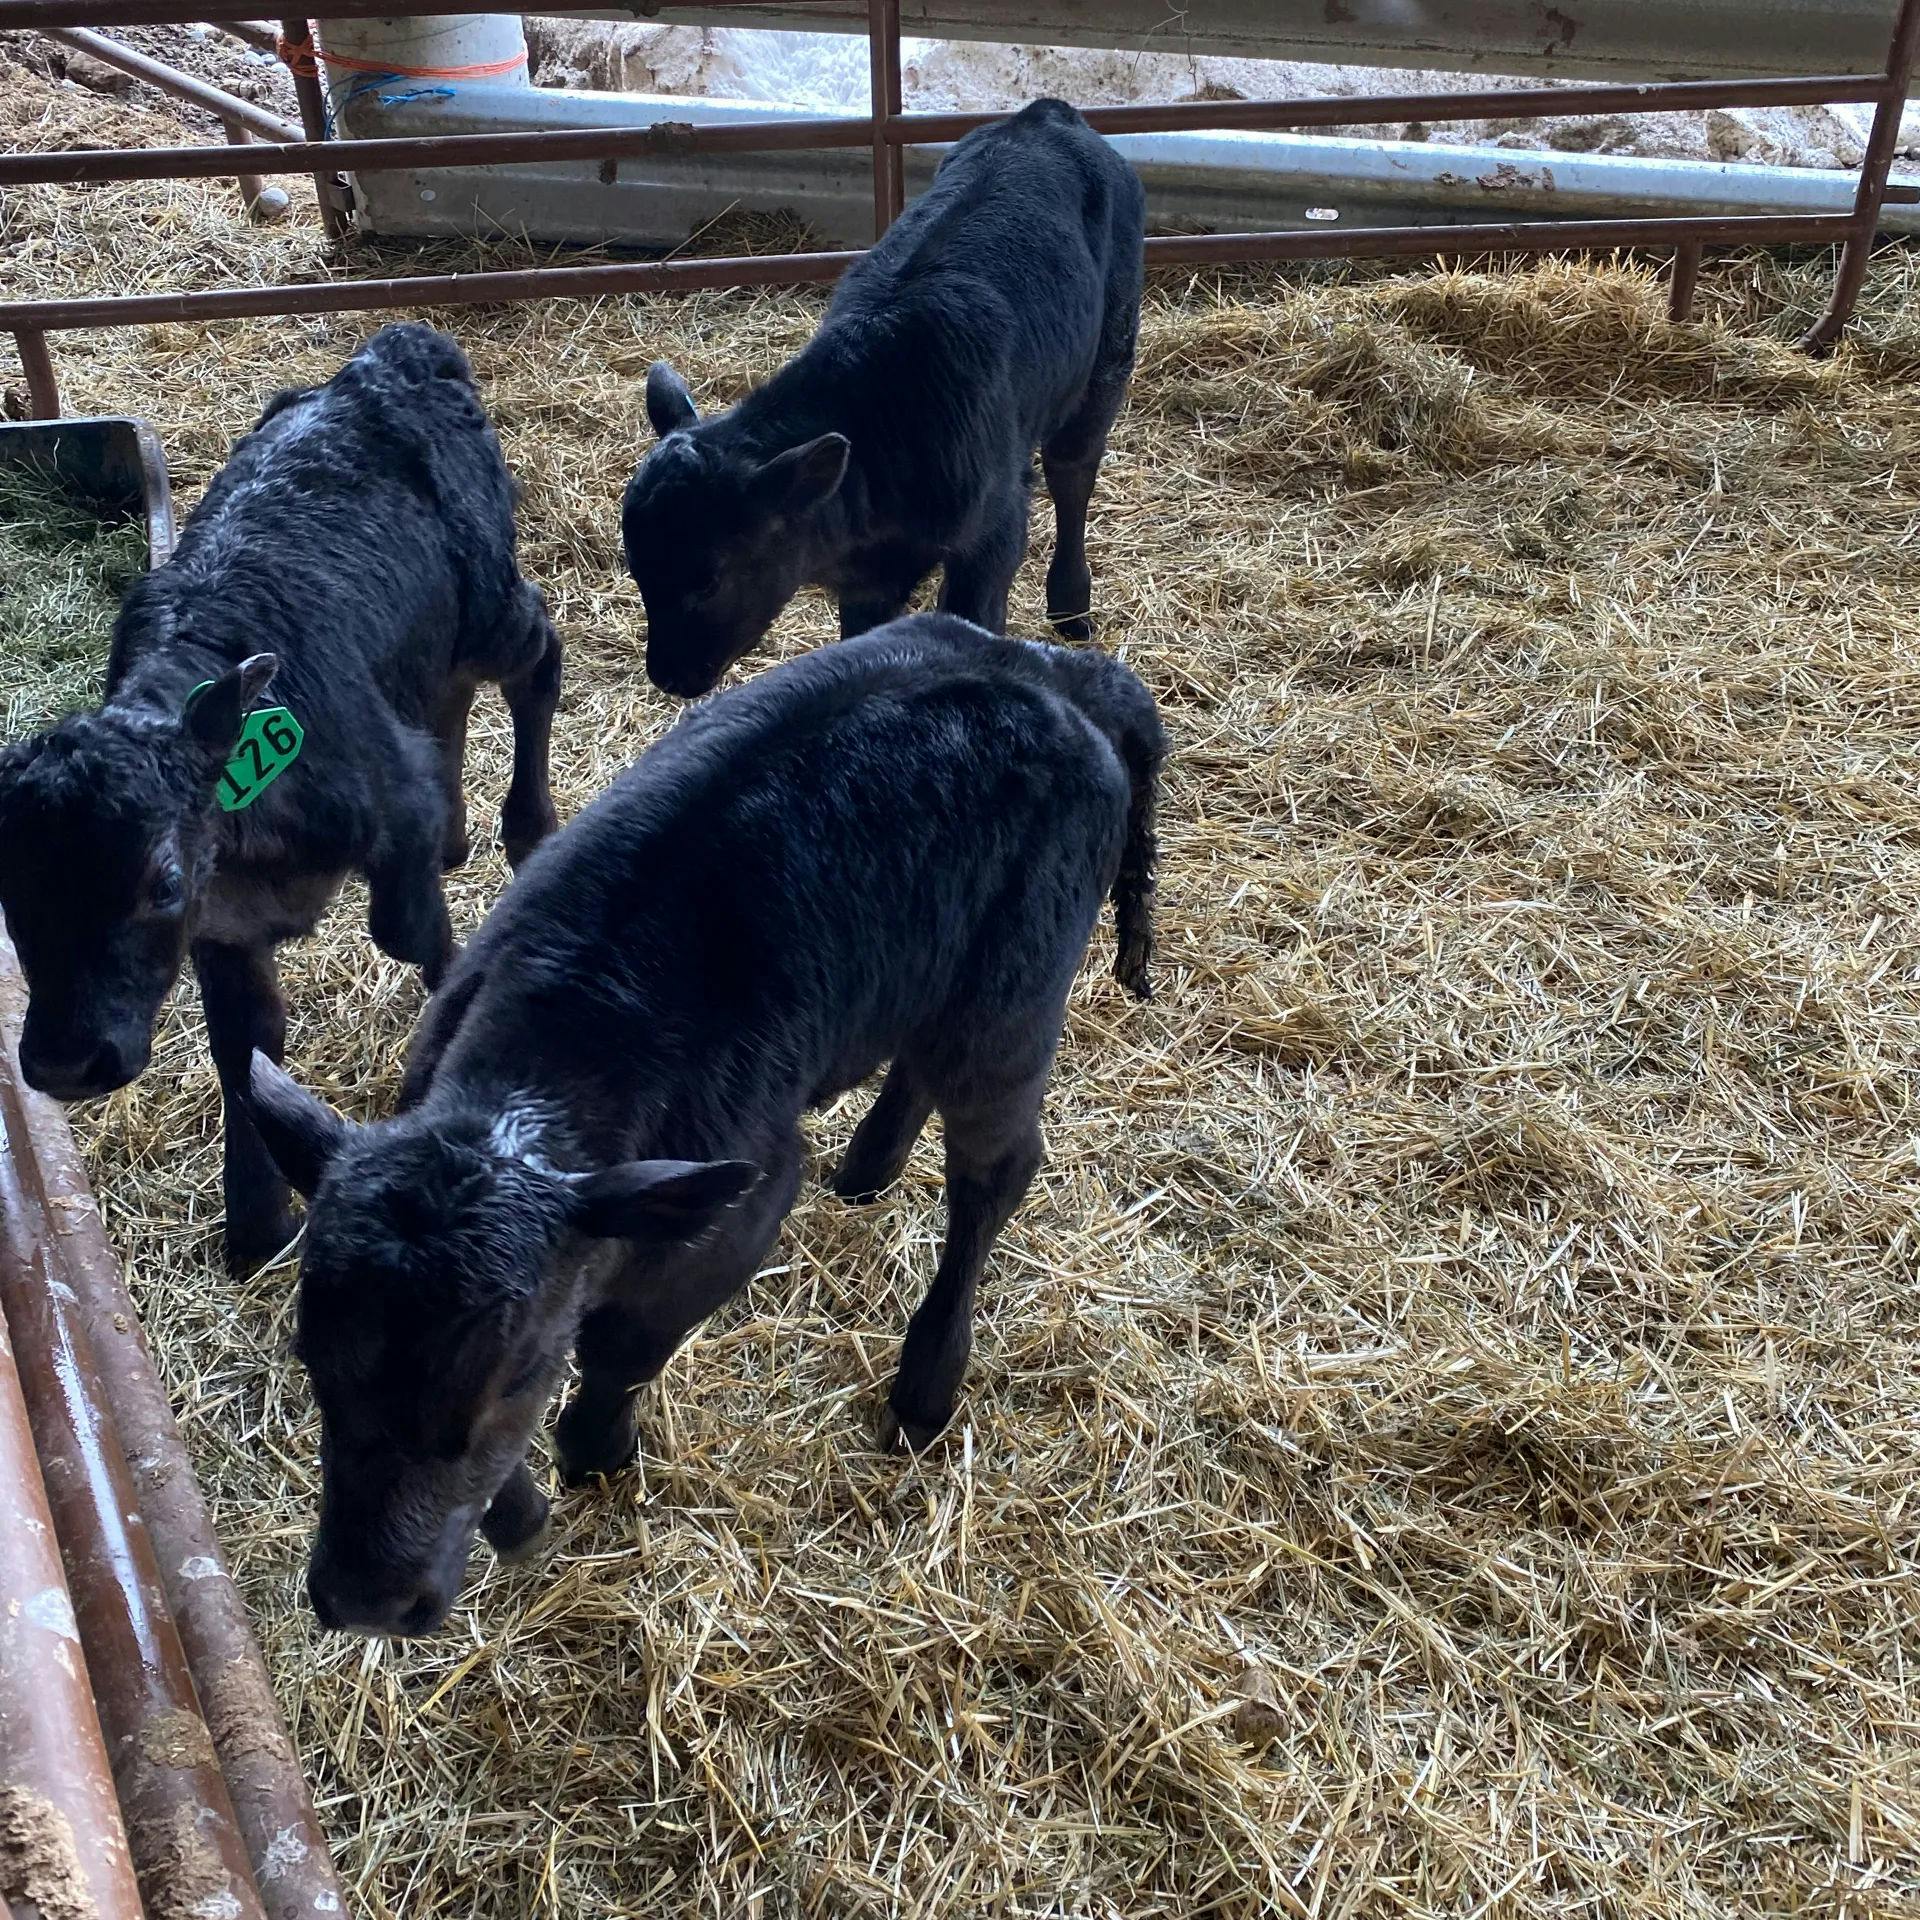 Some of our baby calves!